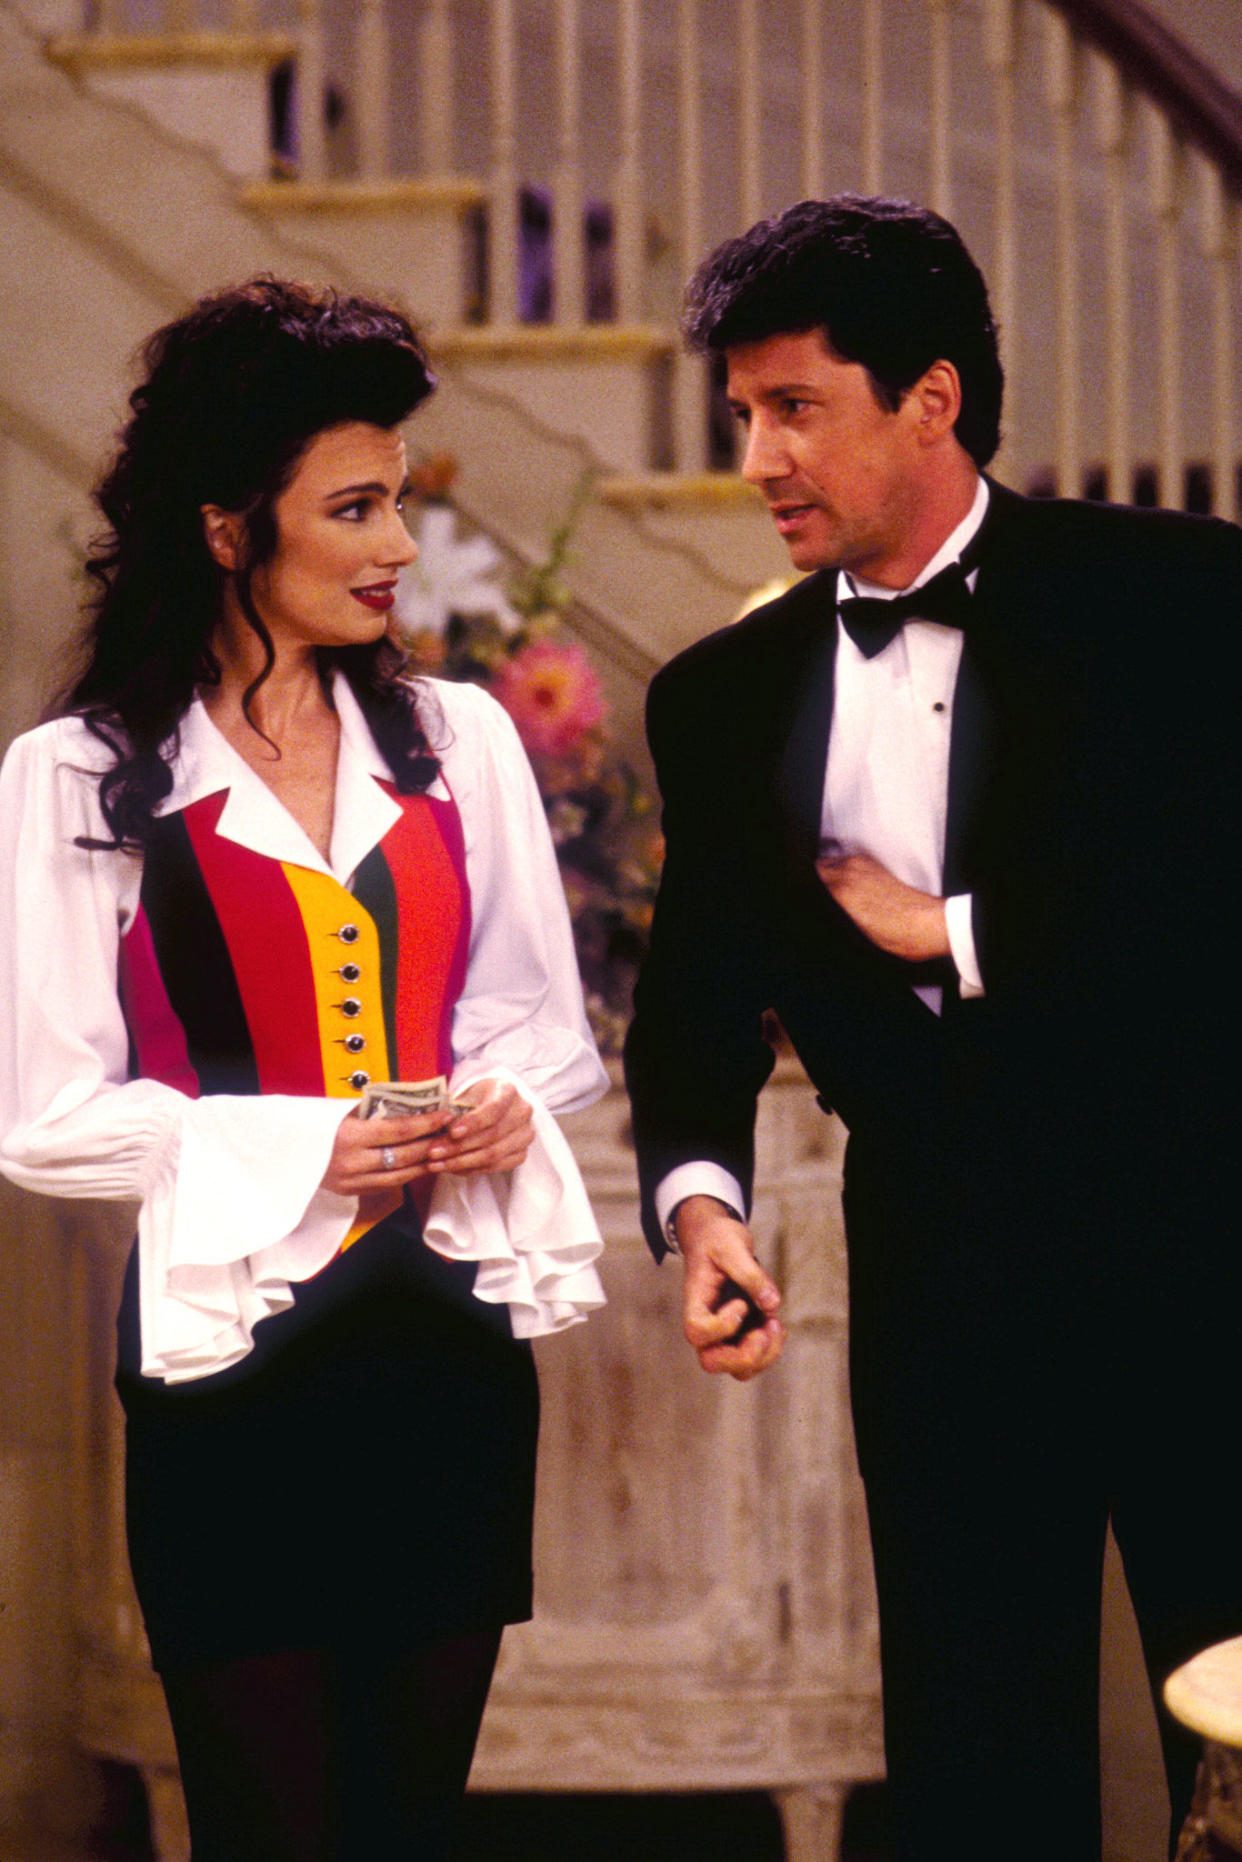 LOS ANGELES - JANUARY 3: THE NANNY, featuring Fran Drescher and Charles Shaugnessy. January 1994. (Photo by CBS via Getty Images) 